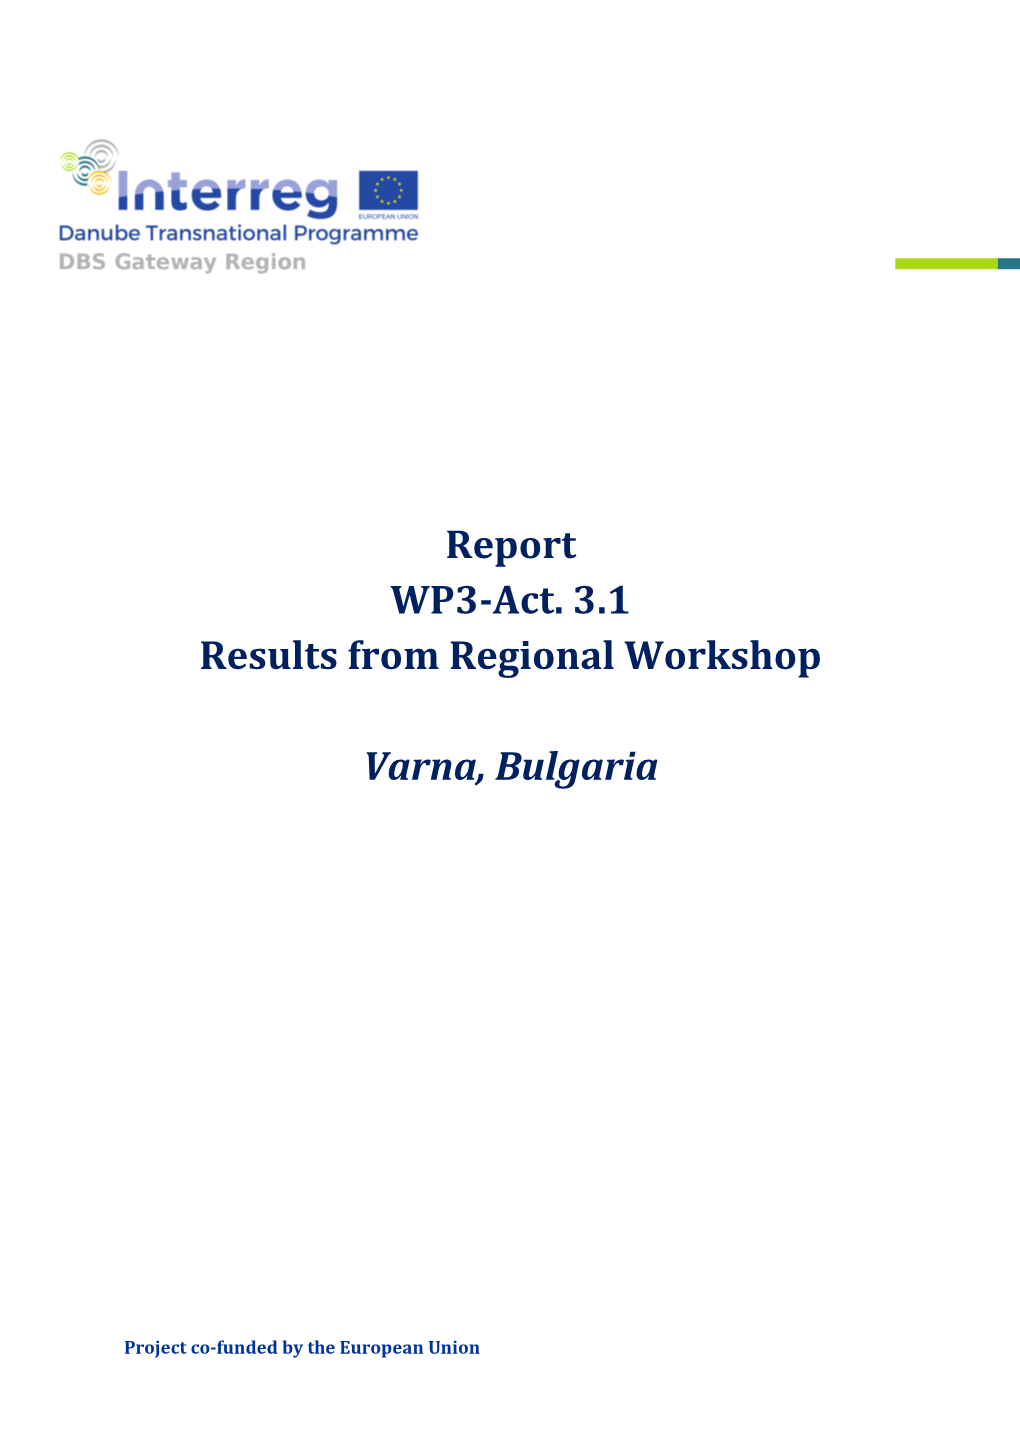 Report WP3-Act. 3.1 Results from Regional Workshop Varna, Bulgaria